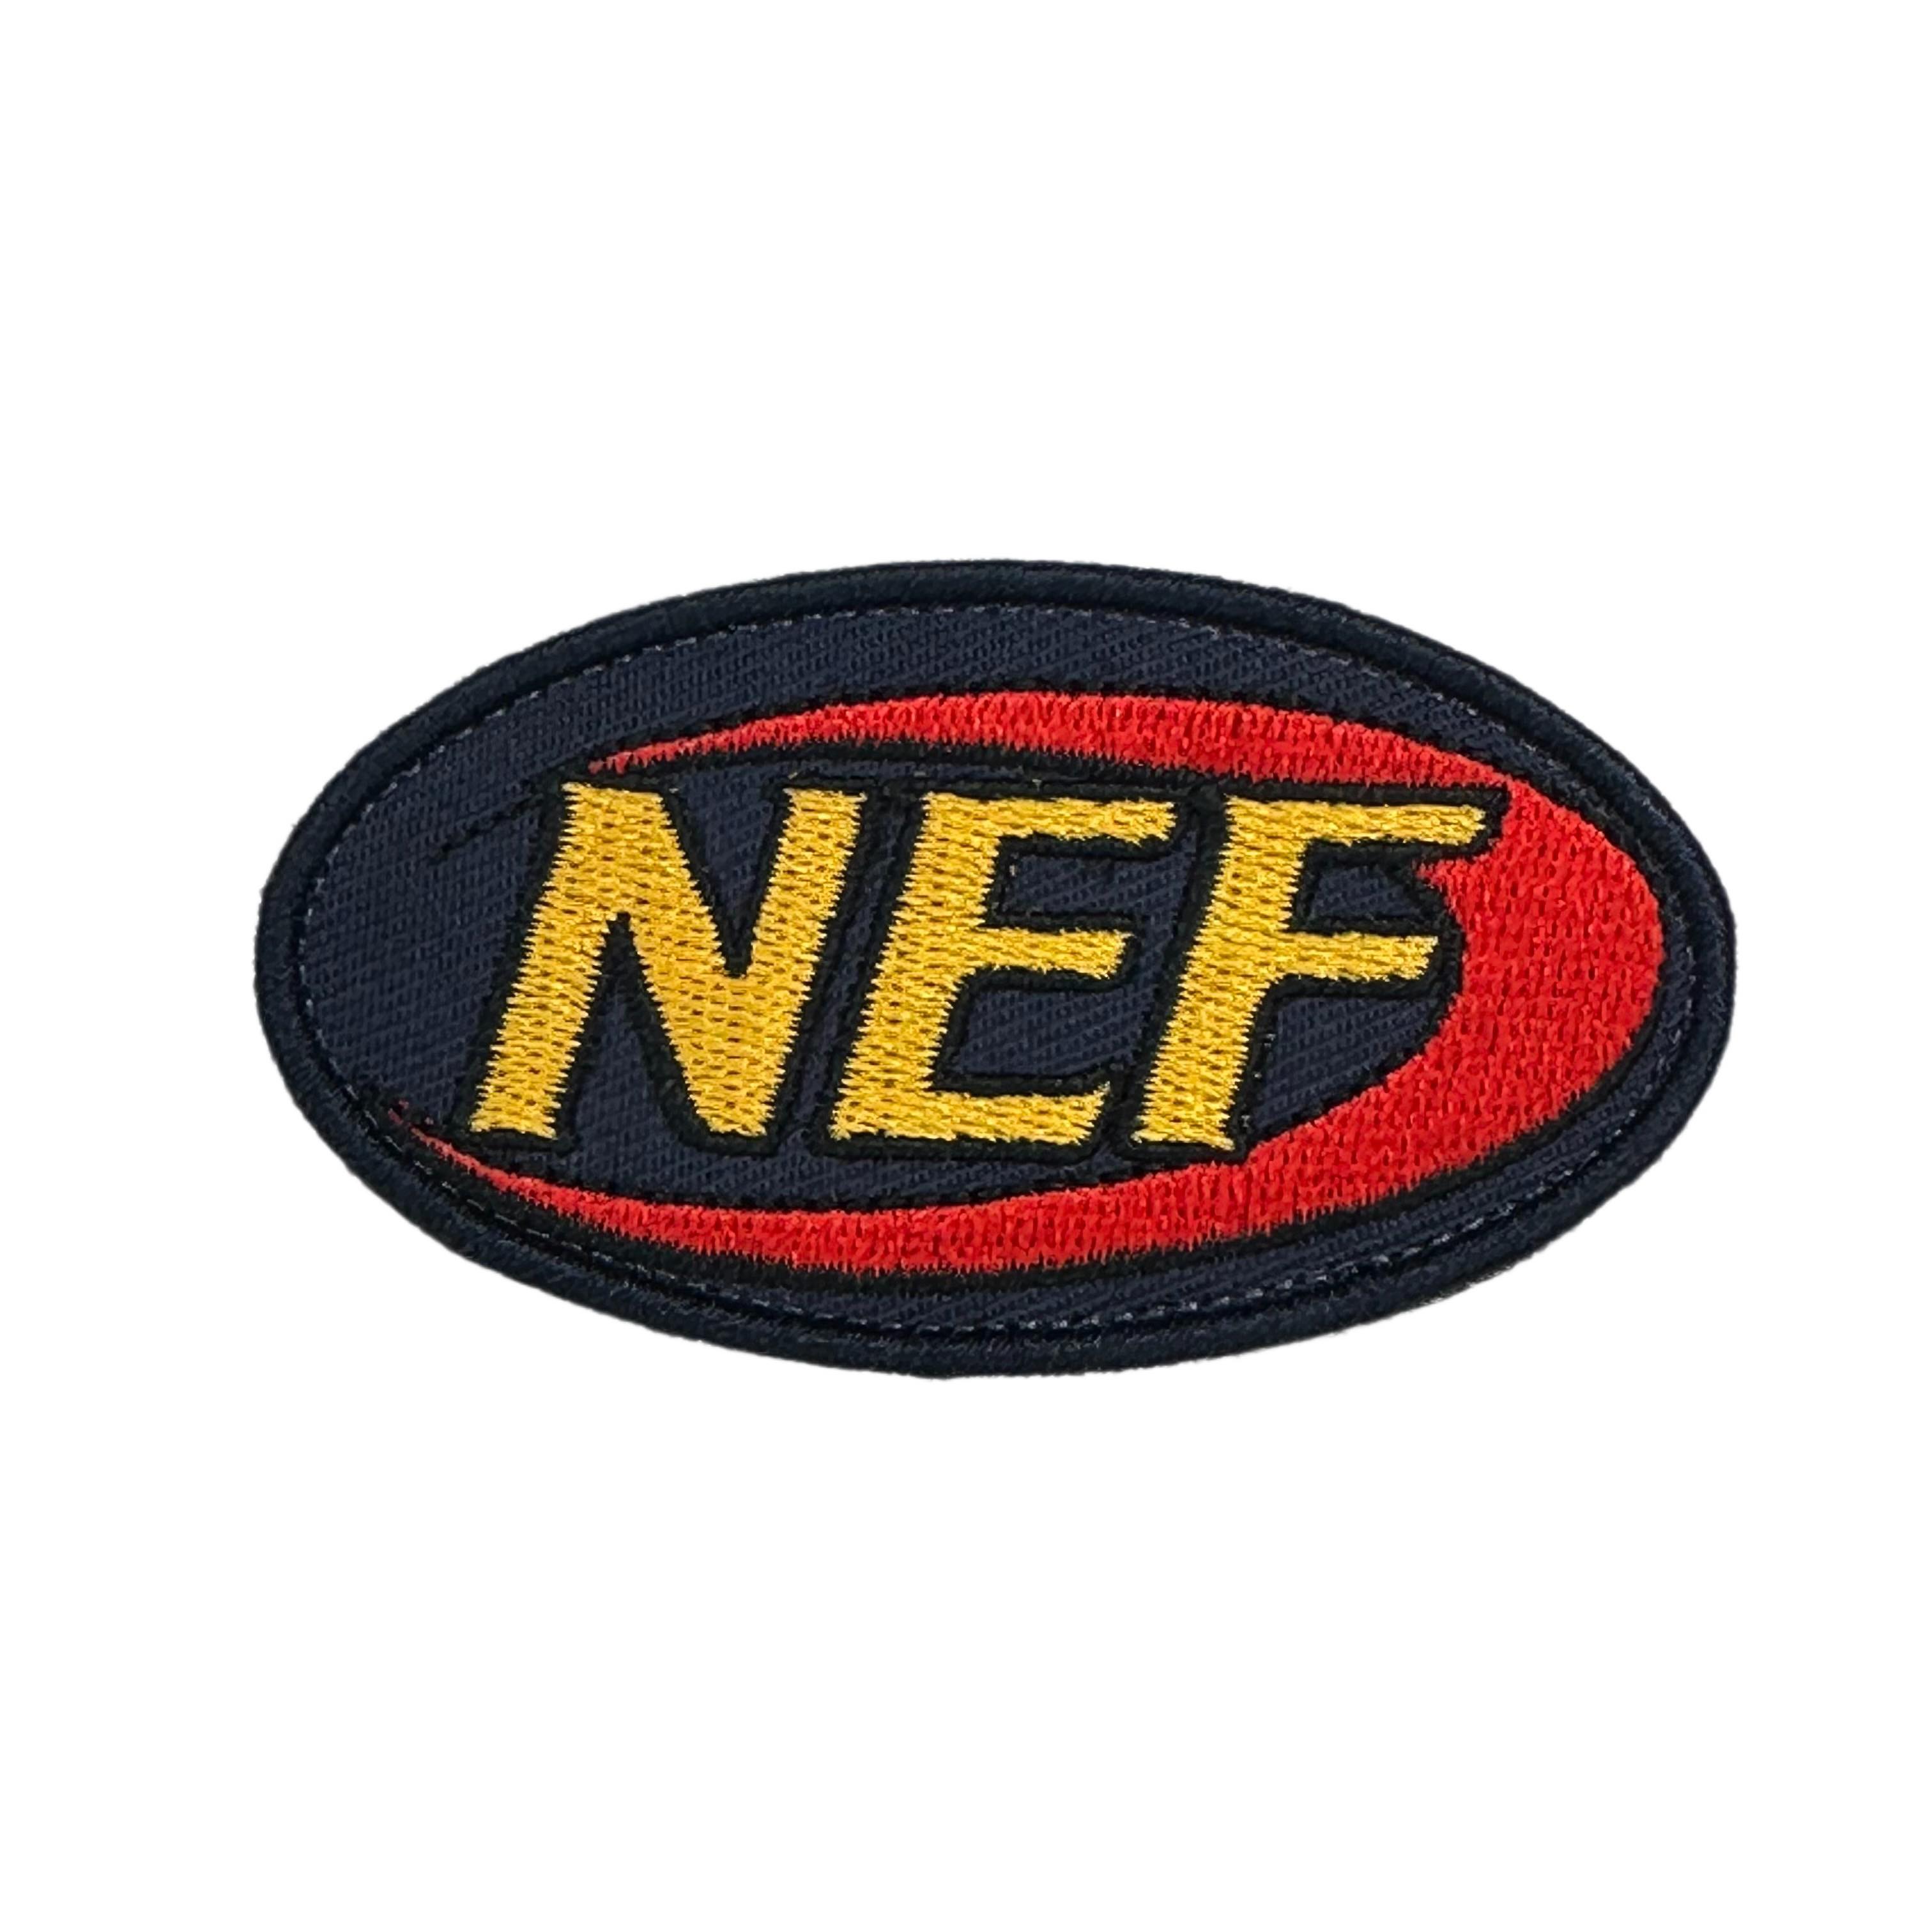 NEF - Nerf Logo Inspired Embroidered Velcro Morale Patch